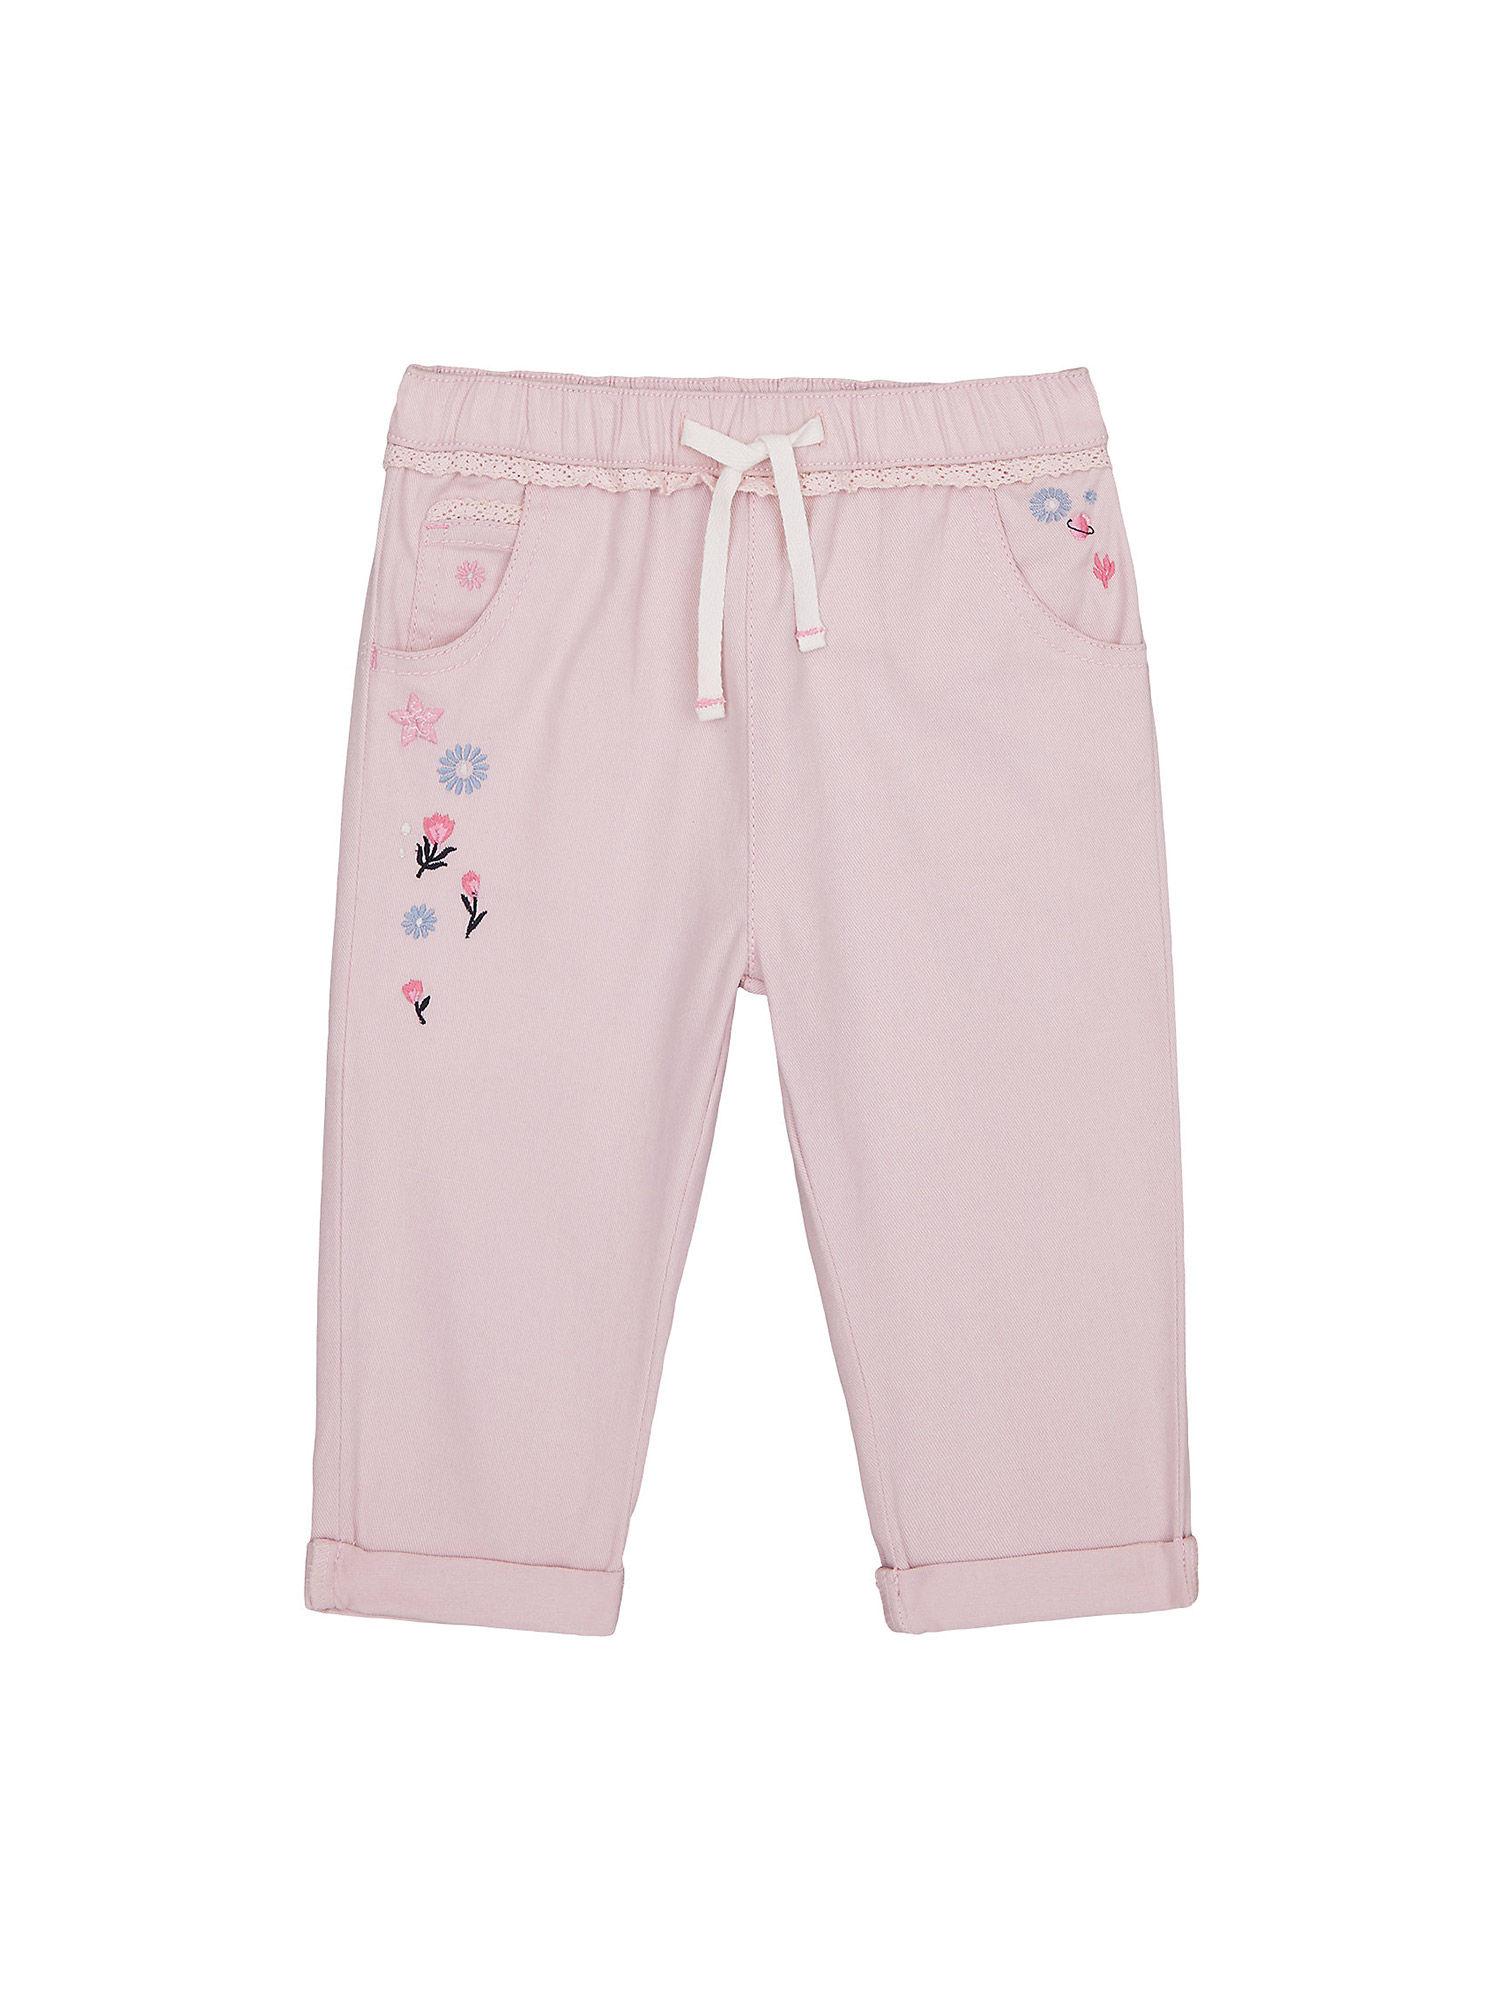 girls trousers embroidered